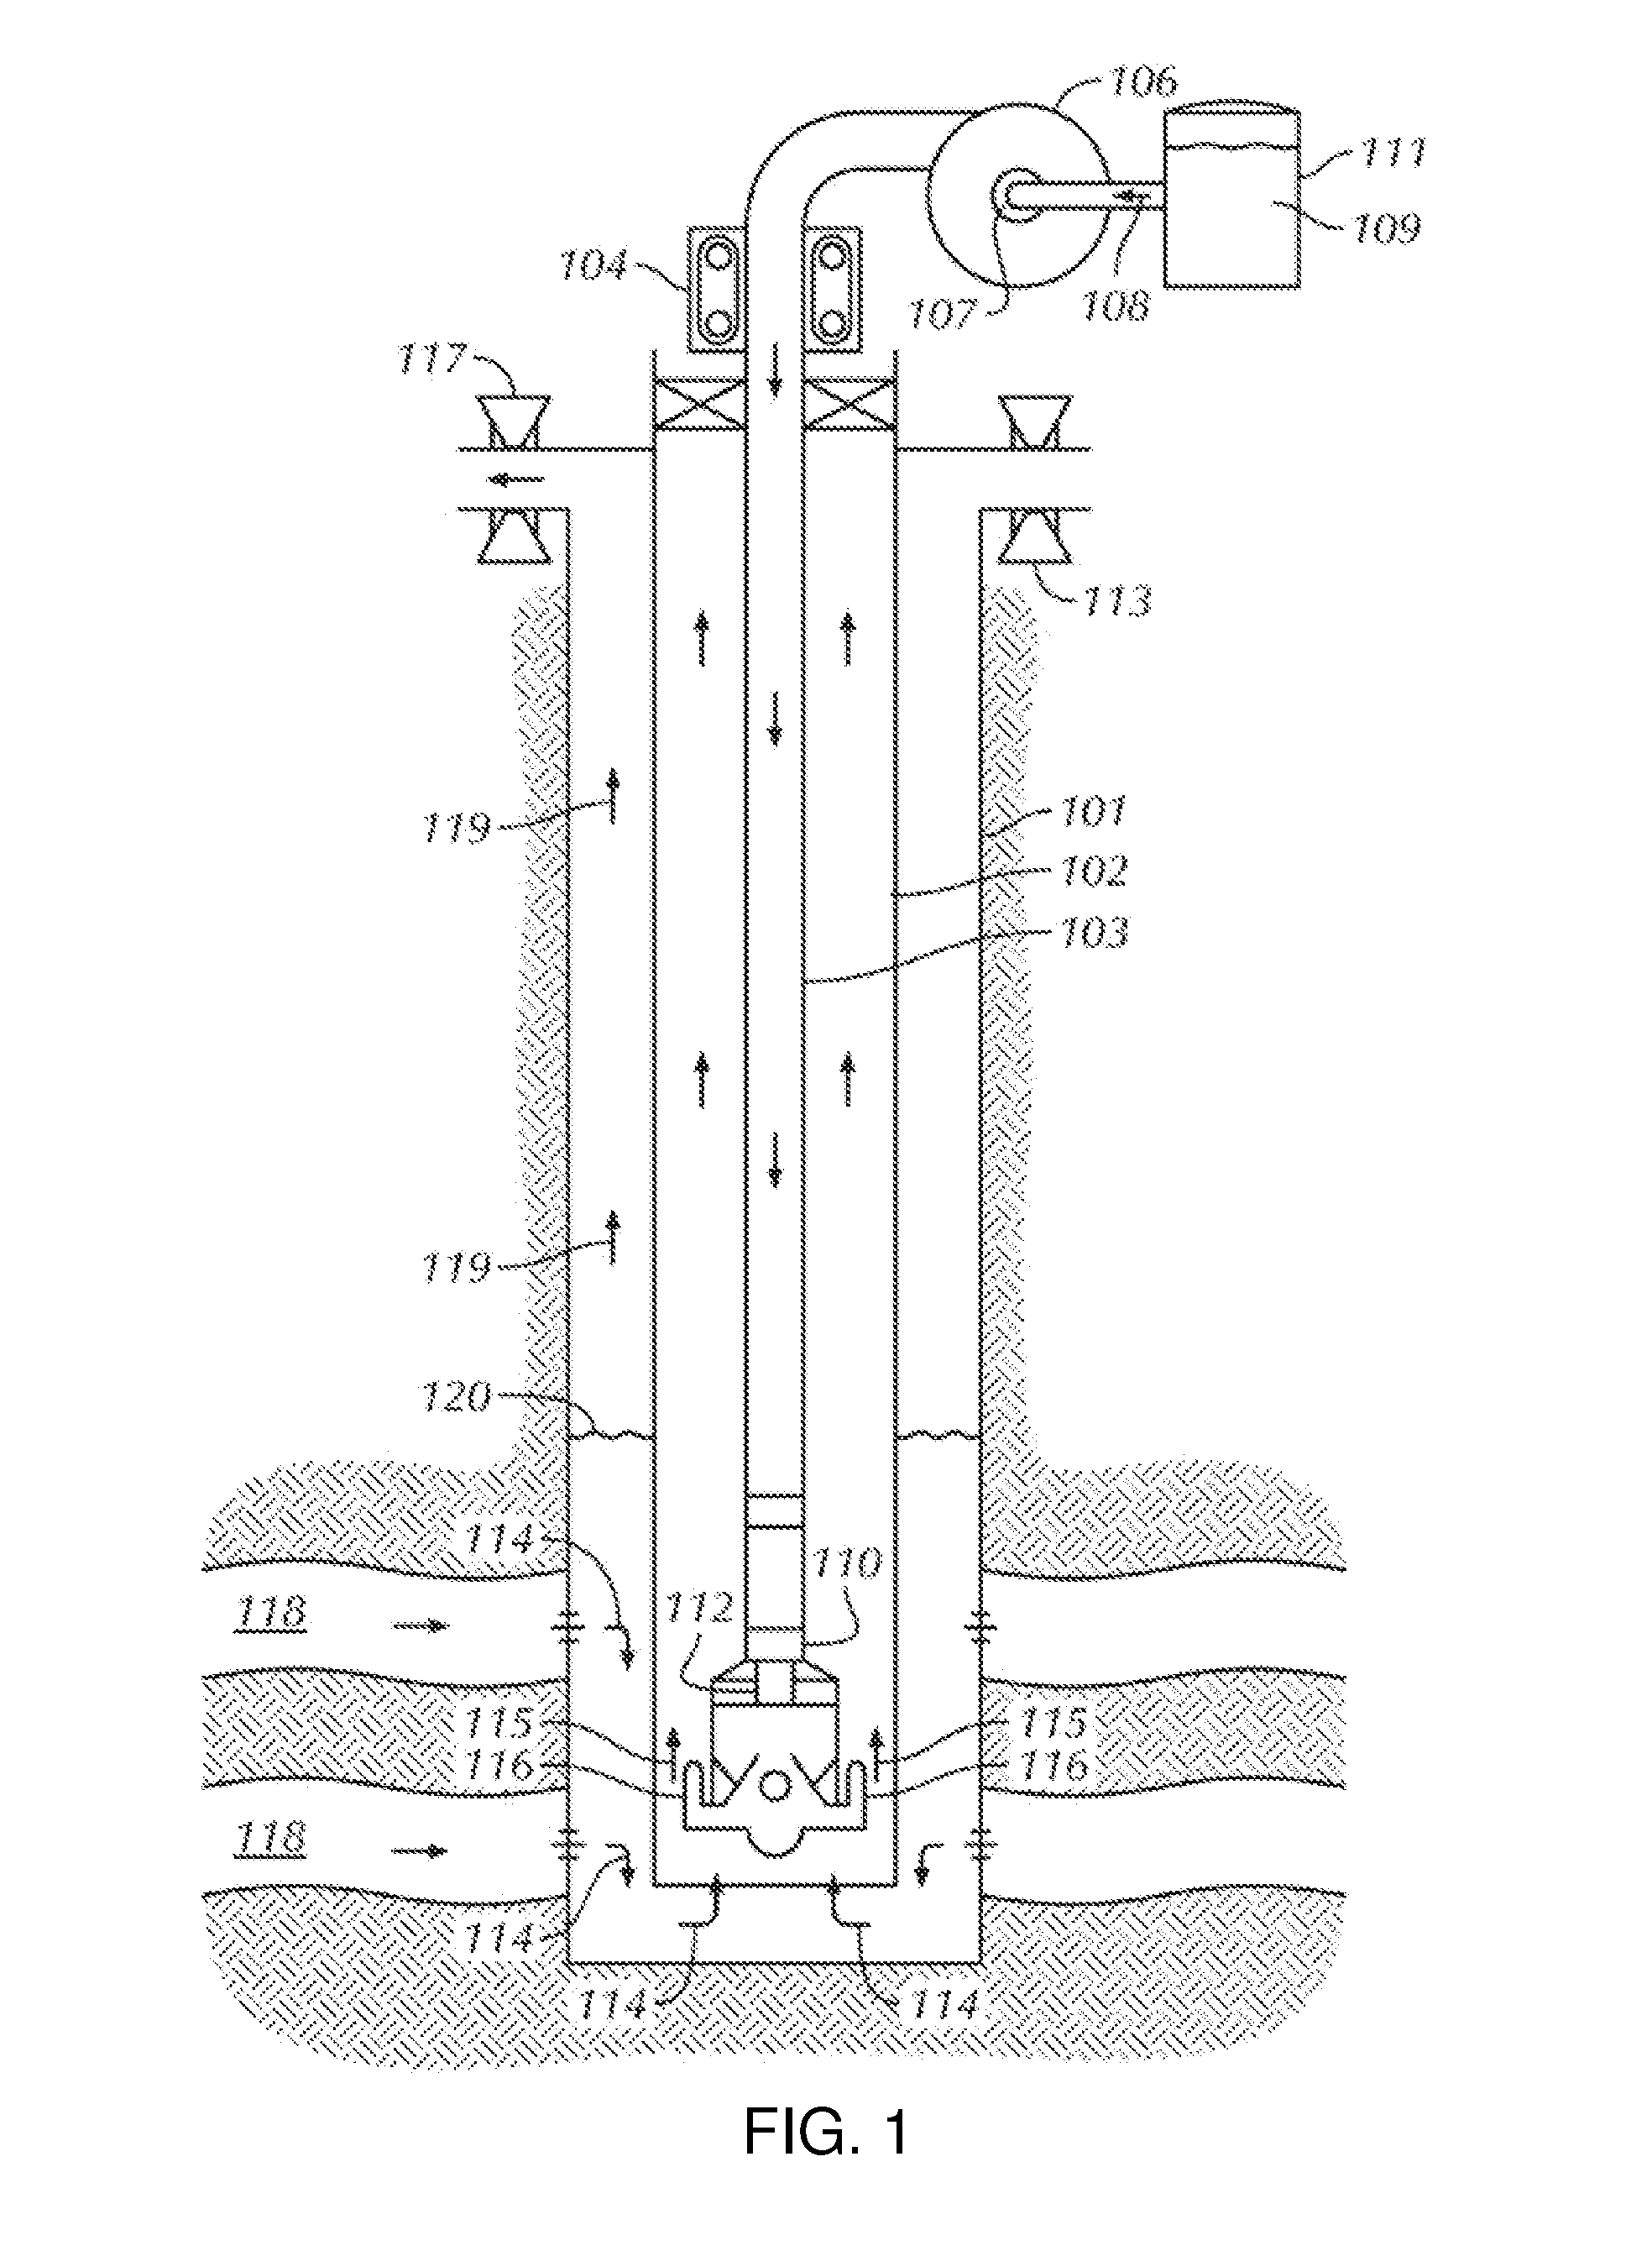 Method and apparatus to release energy in a well